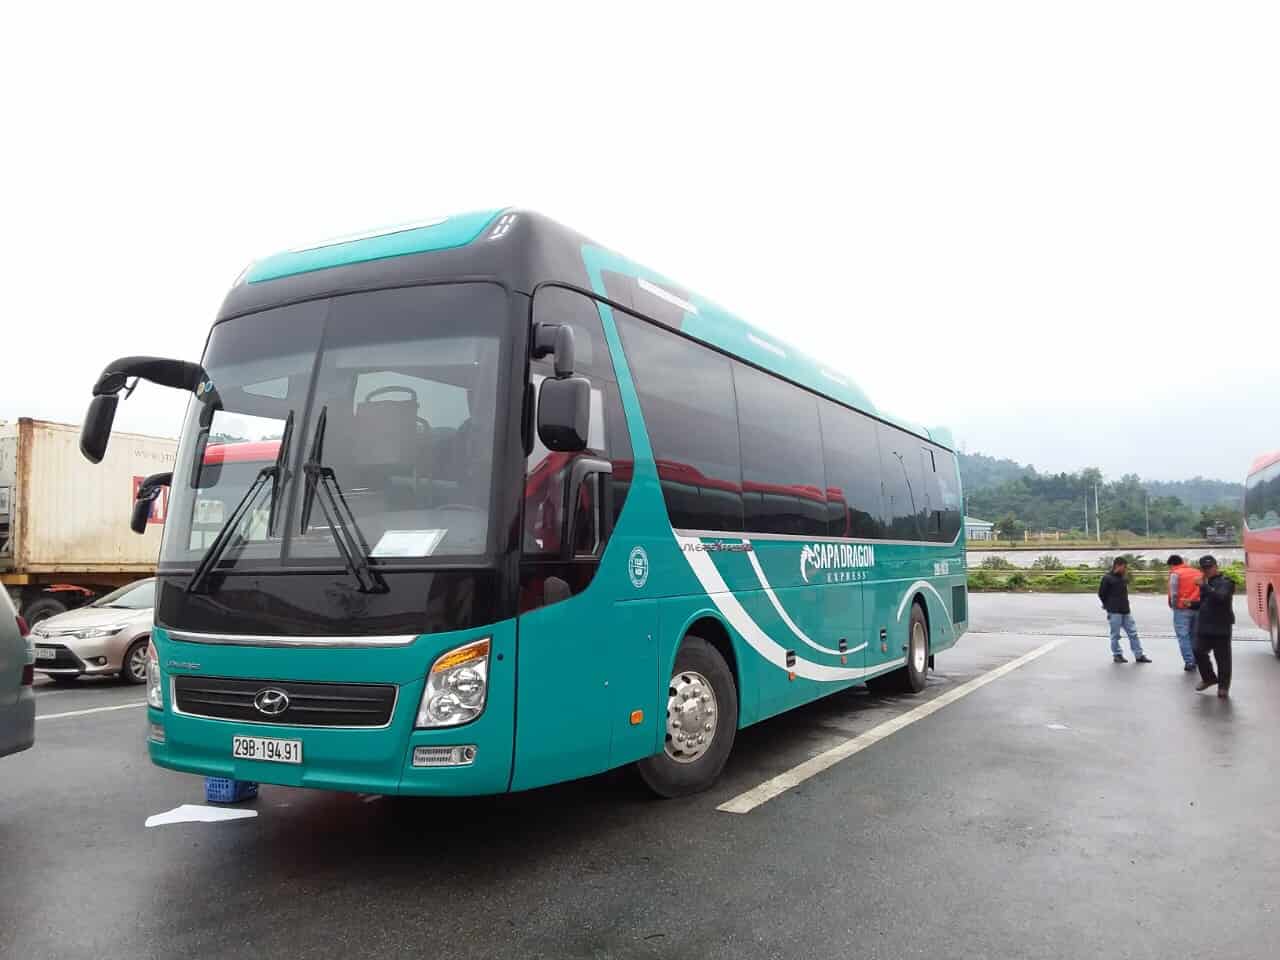 Getting from Sapa to Halong Bay by bus